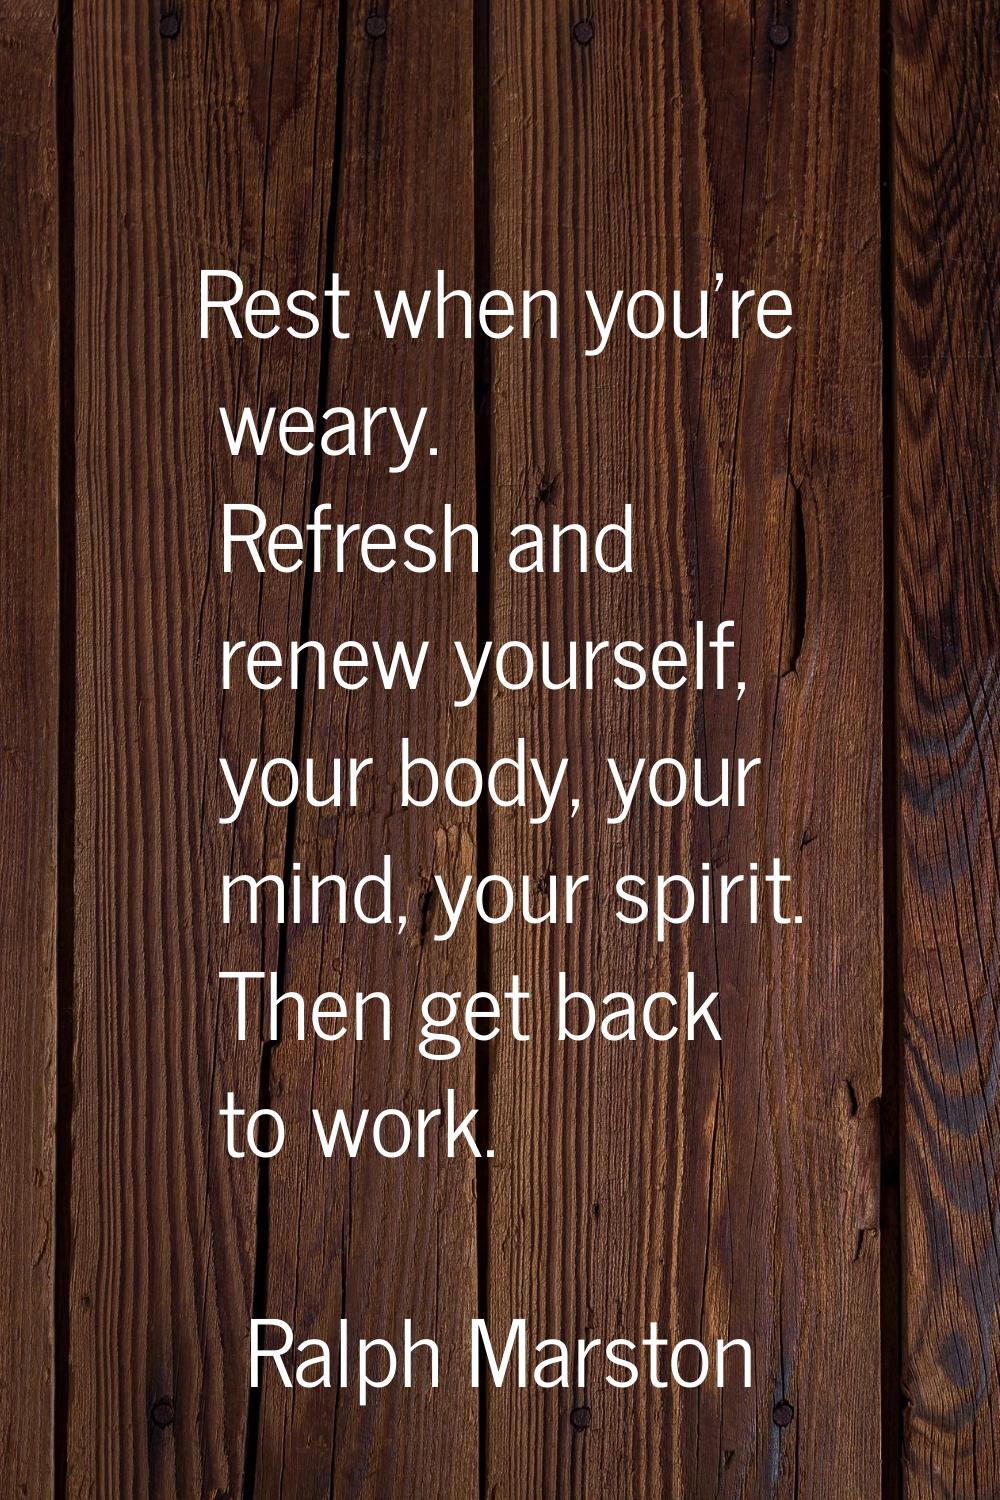 Rest when you're weary. Refresh and renew yourself, your body, your mind, your spirit. Then get bac